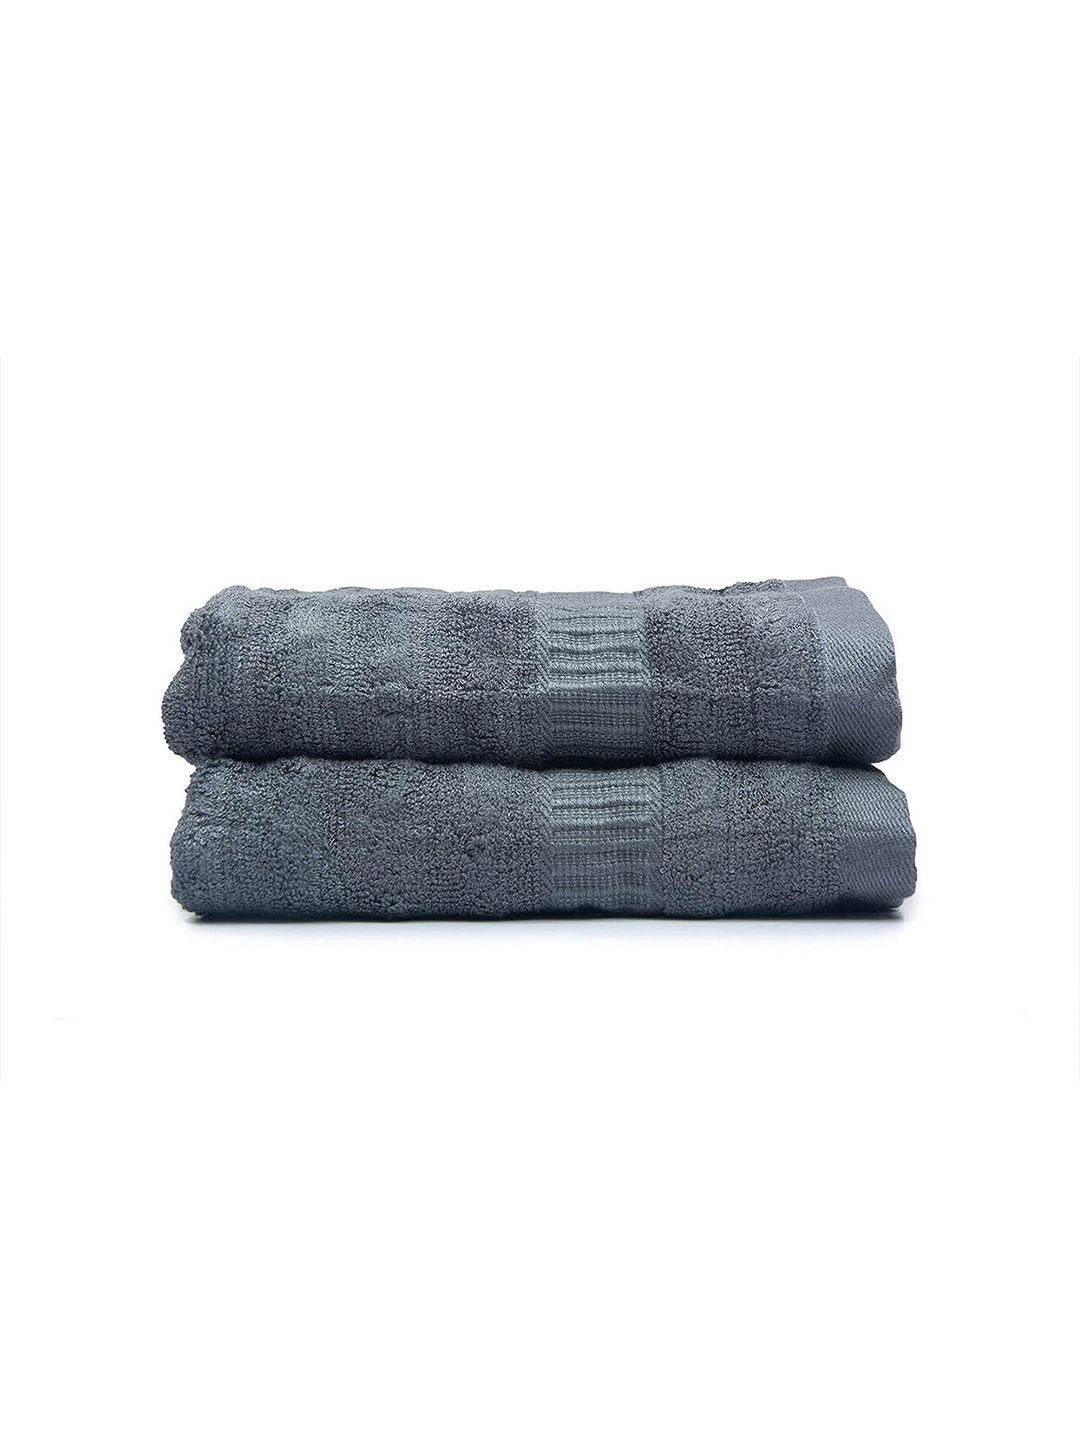 MUSH Set Of 2 Space Grey Solid 600 GSM Ultra Soft & Eco Friendly Bamboo Hand Towel Price in India